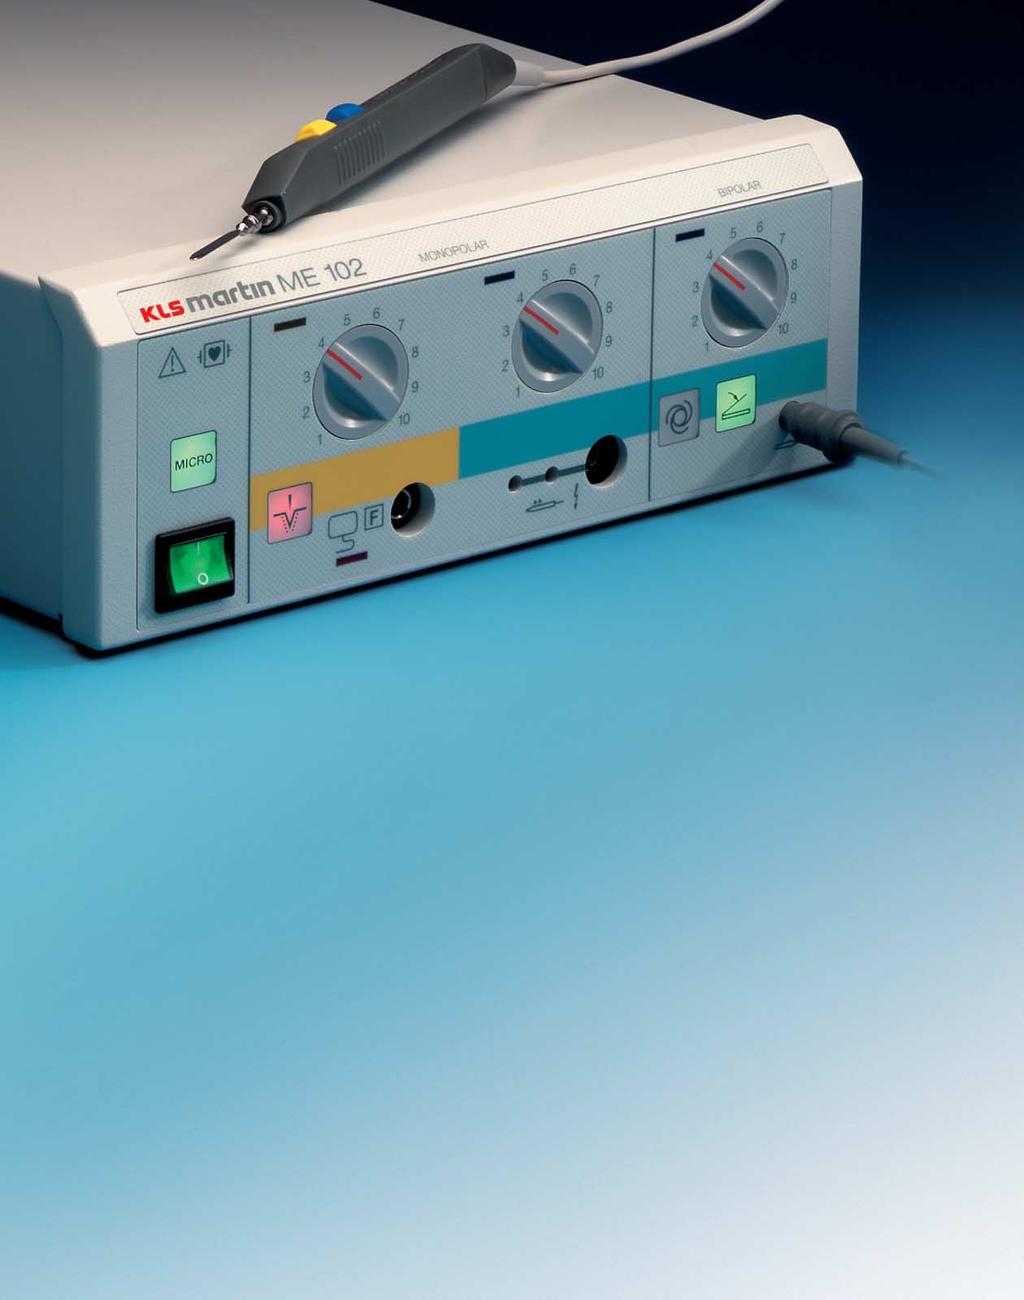 The KLS Martin ME 102 is a 100-W class, universally applicable HF electrosurgical unit with excellent cutting and